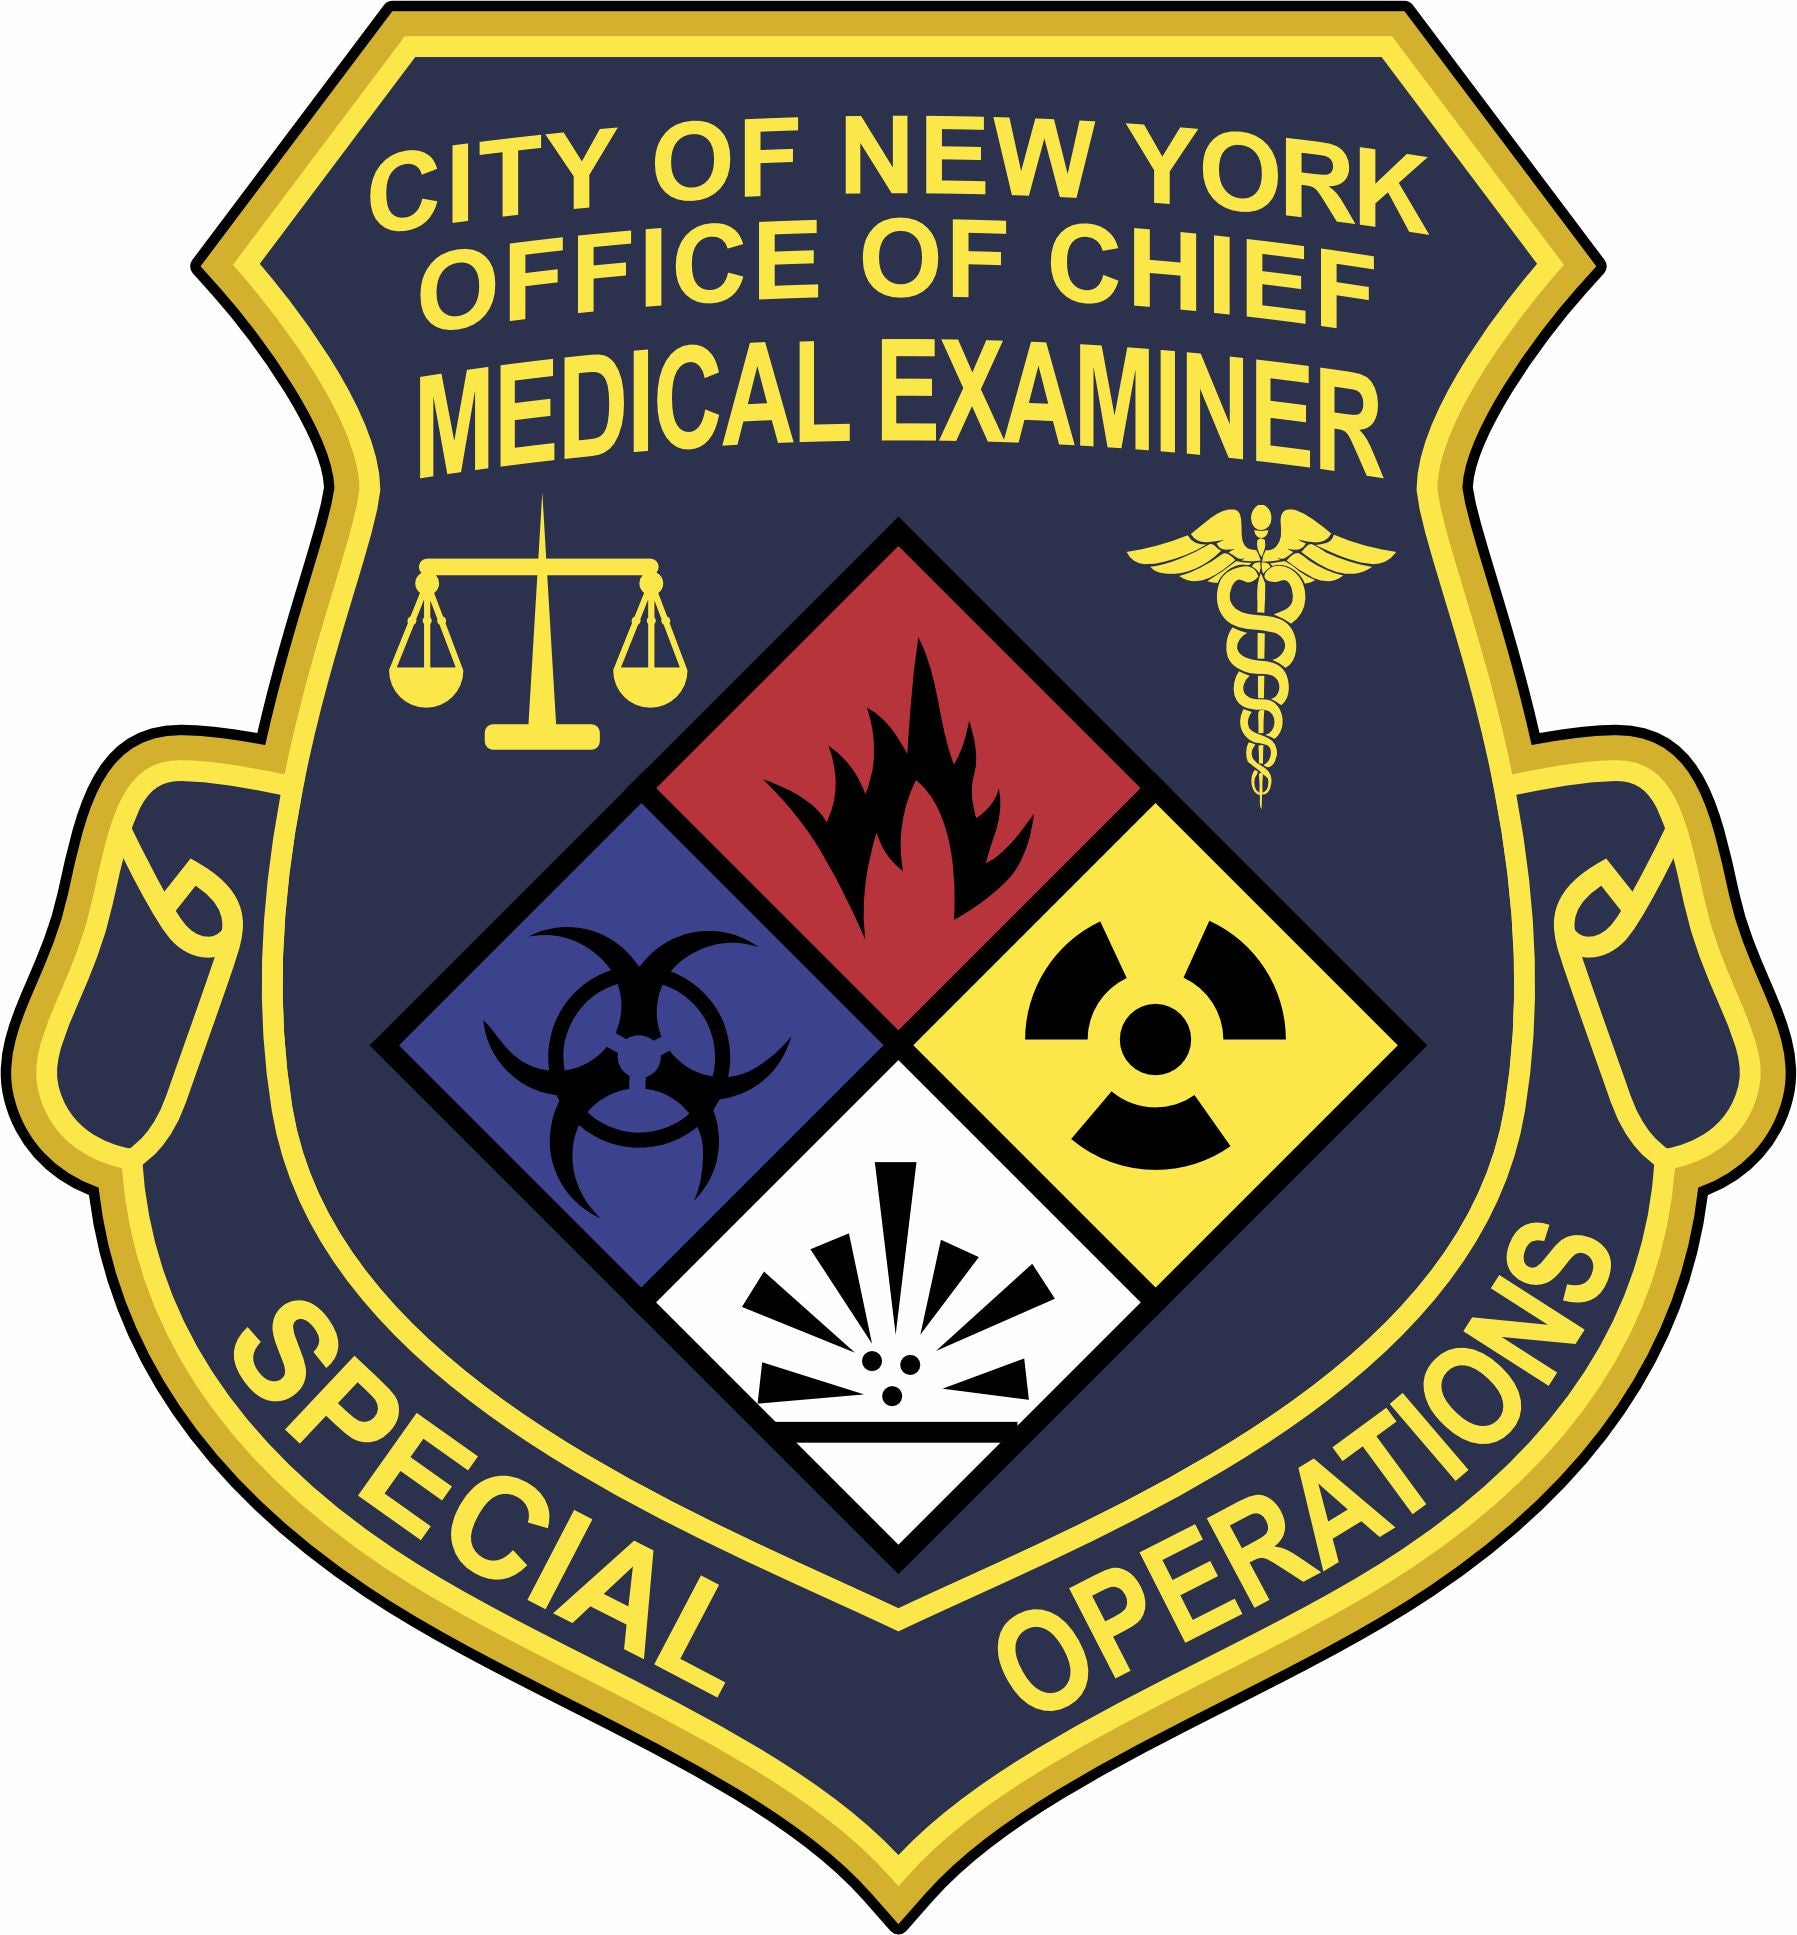 SUBDUED NEW JERSEY (NJ) EMERGENCY MEDICAL TECHNICIAN (EMT) PATCH WINDOW  DECAL